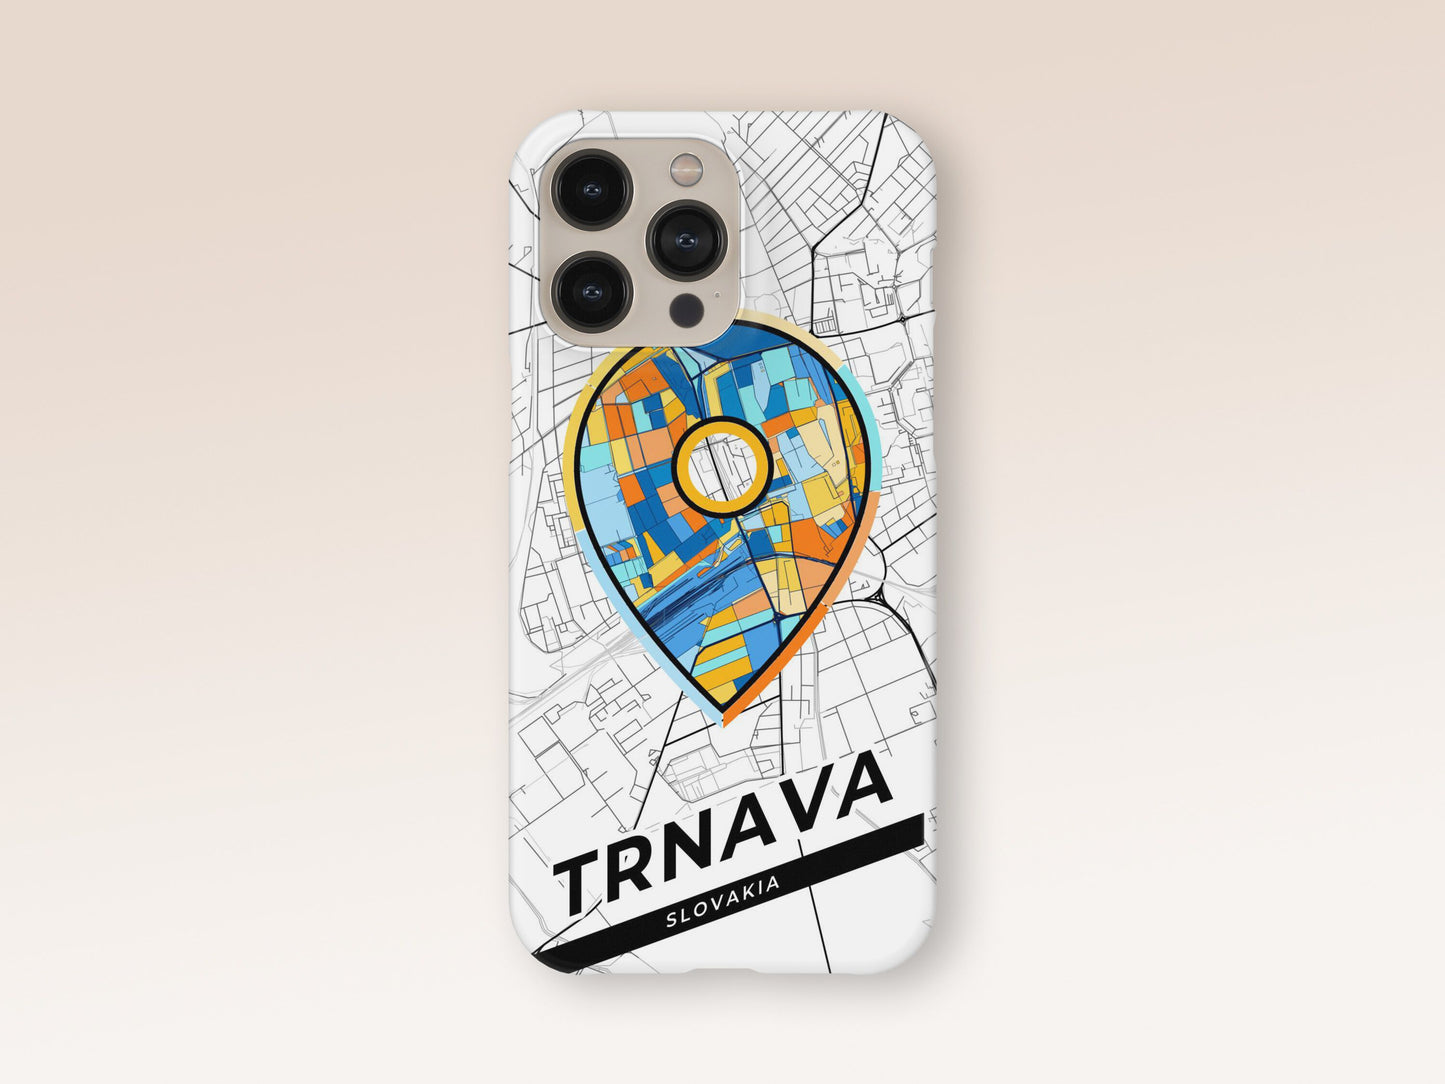 Trnava Slovakia slim phone case with colorful icon. Birthday, wedding or housewarming gift. Couple match cases. 1